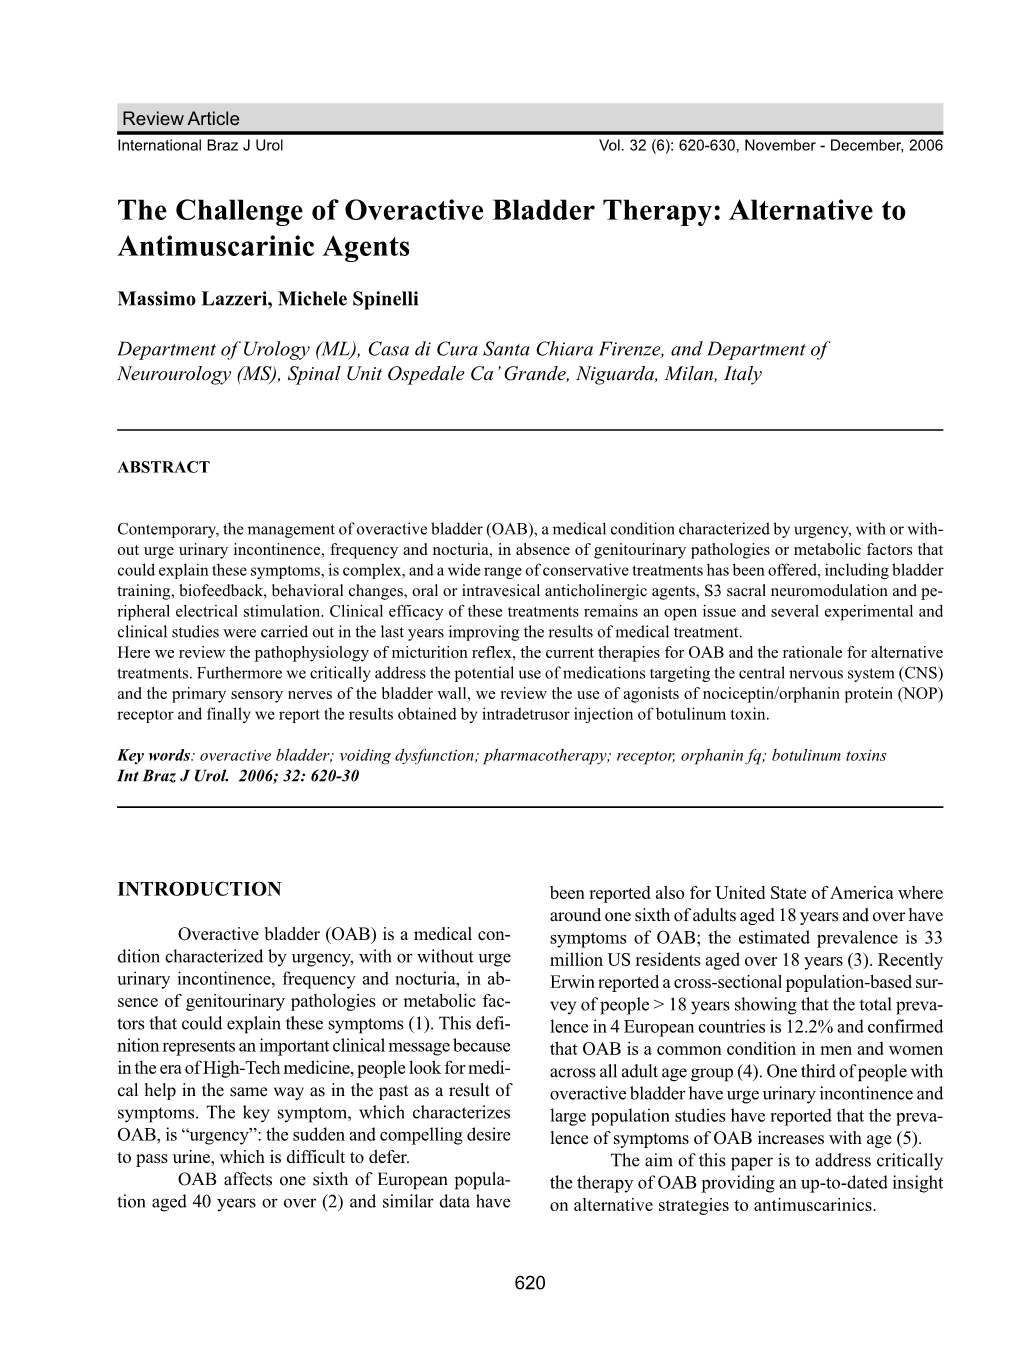 The Challenge of Overactive Bladder Therapy: Alternative to Antimuscarinic Agents